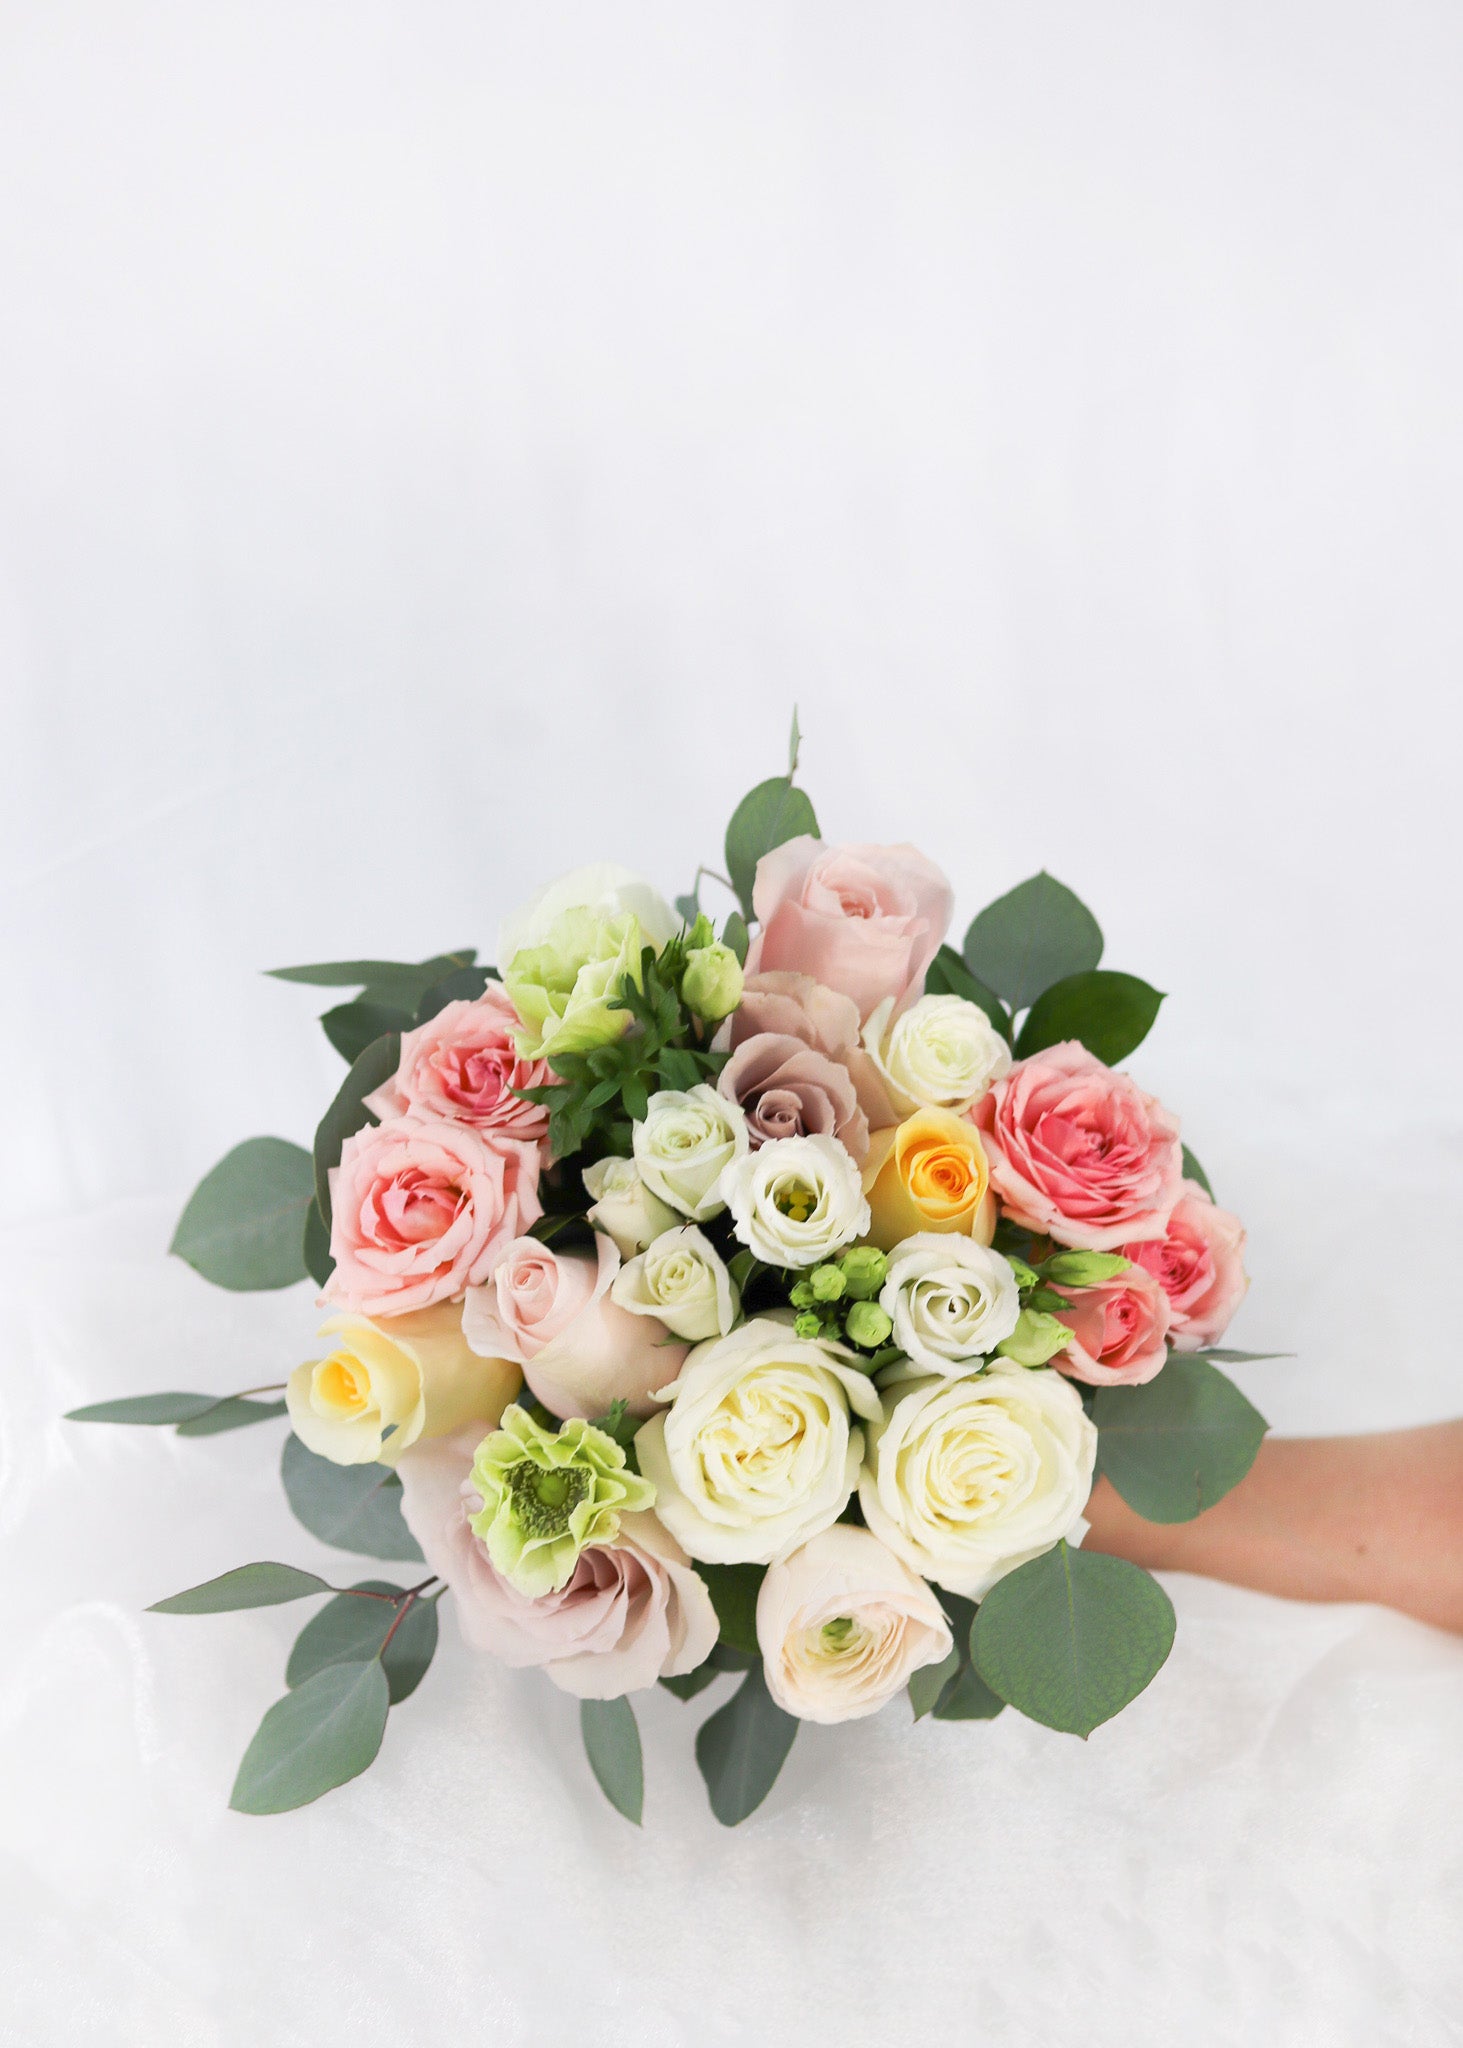 Lovely Bridal Bouquet